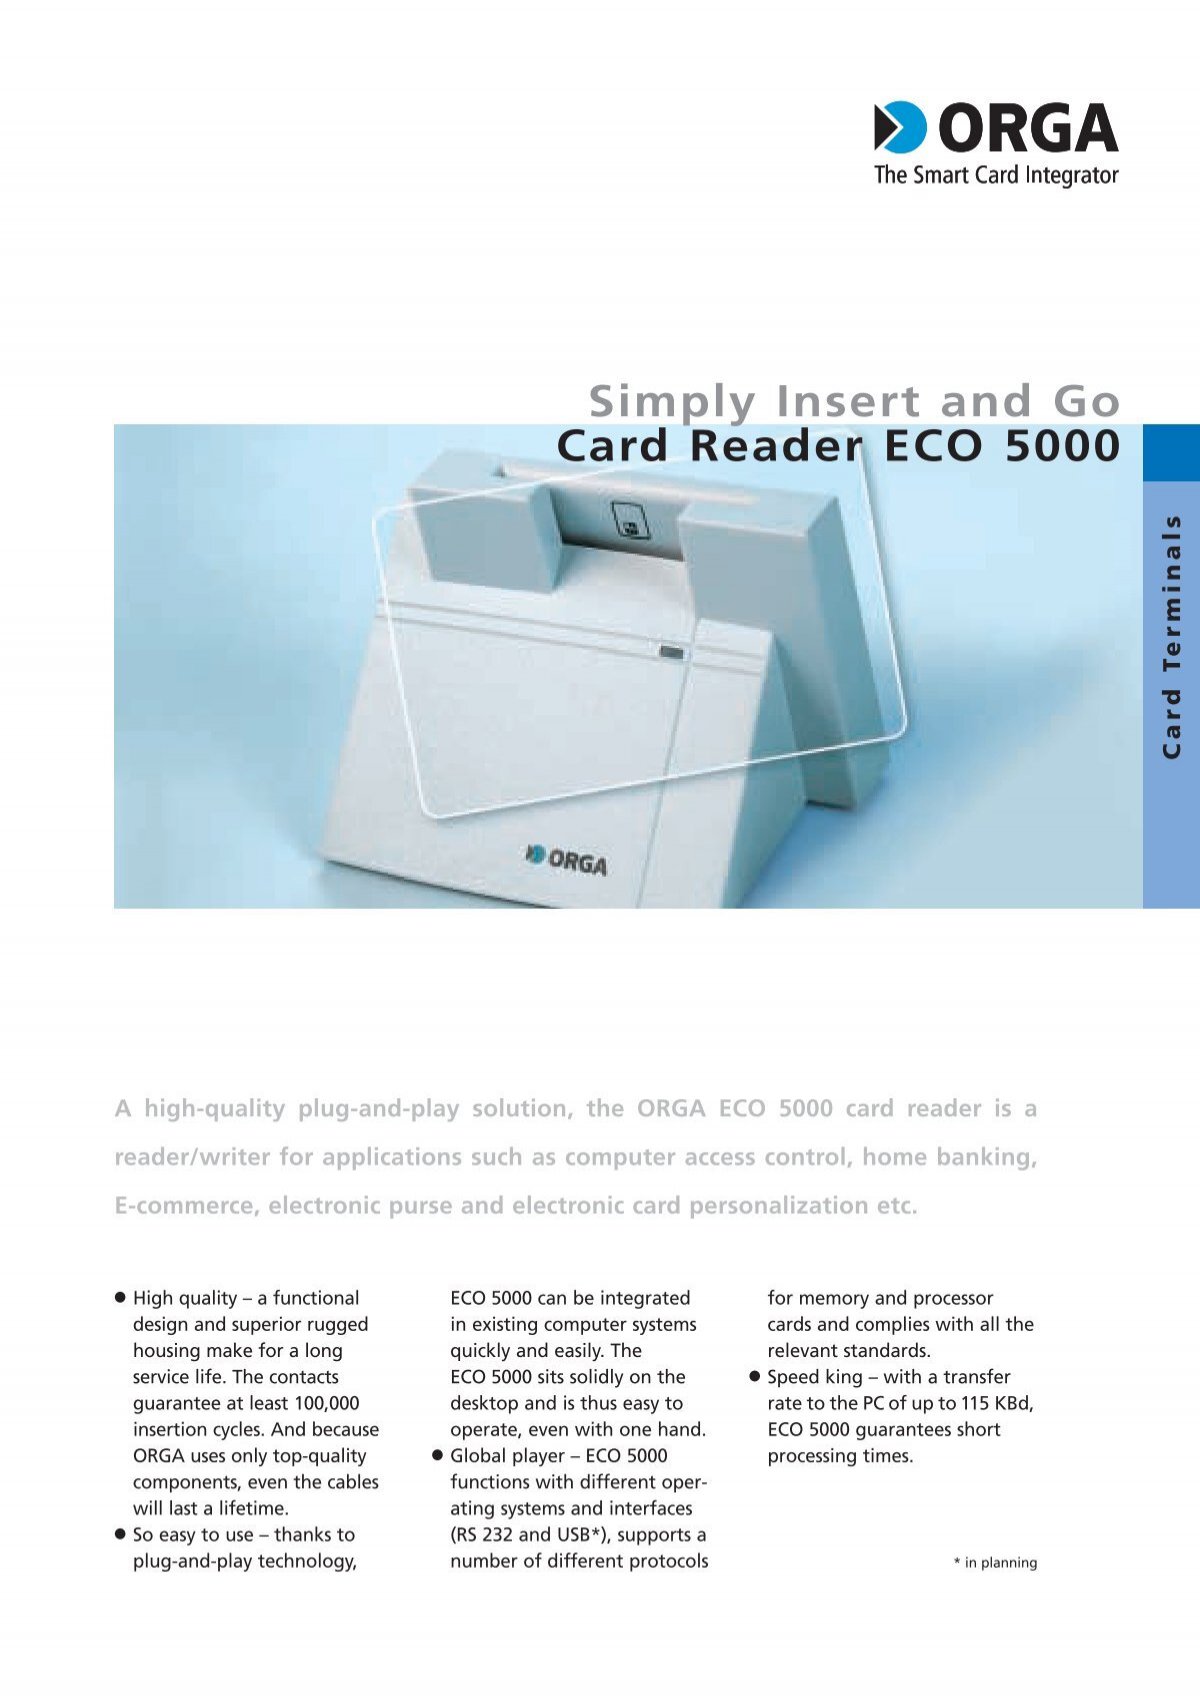 Loyalty and prepaid cards for retail payment solutions | G+D